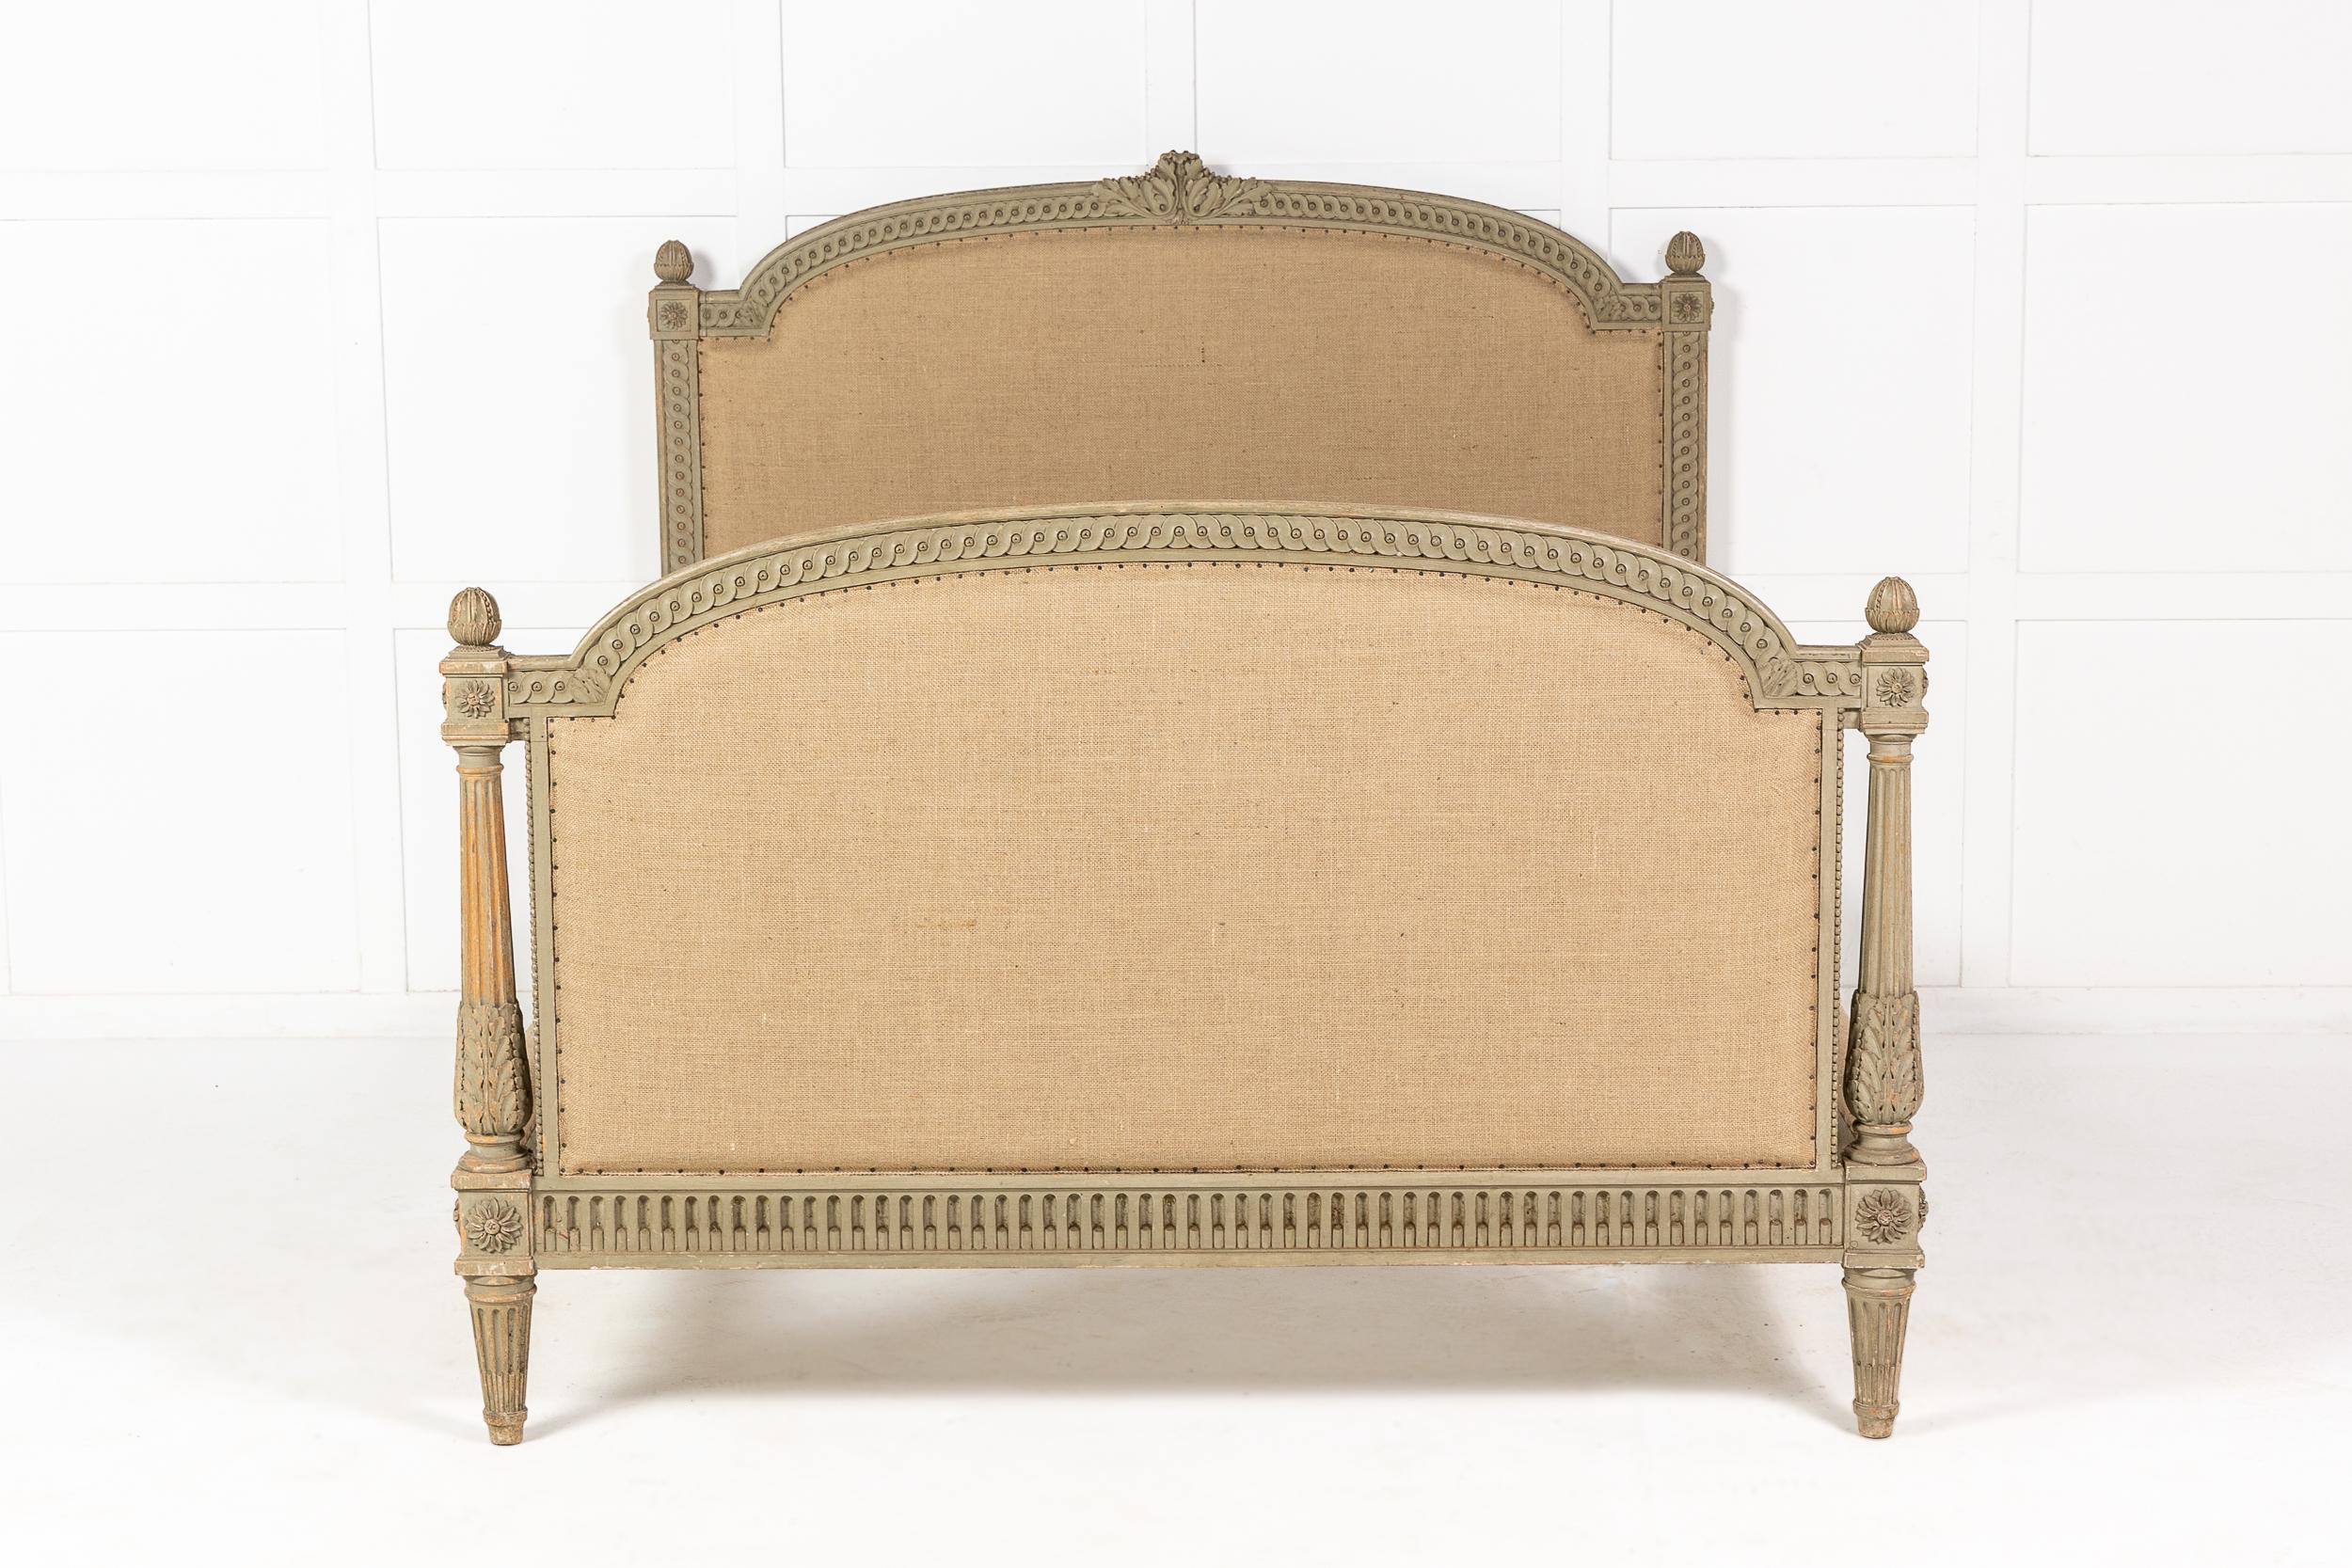 A wonderful, king sized, great quality 19th century French bed with a delightfully carved frame. The top rail has a central carving of acanthus leaves and repeating patterns throughout the frame, unusual deep stop fluted carving to the base.